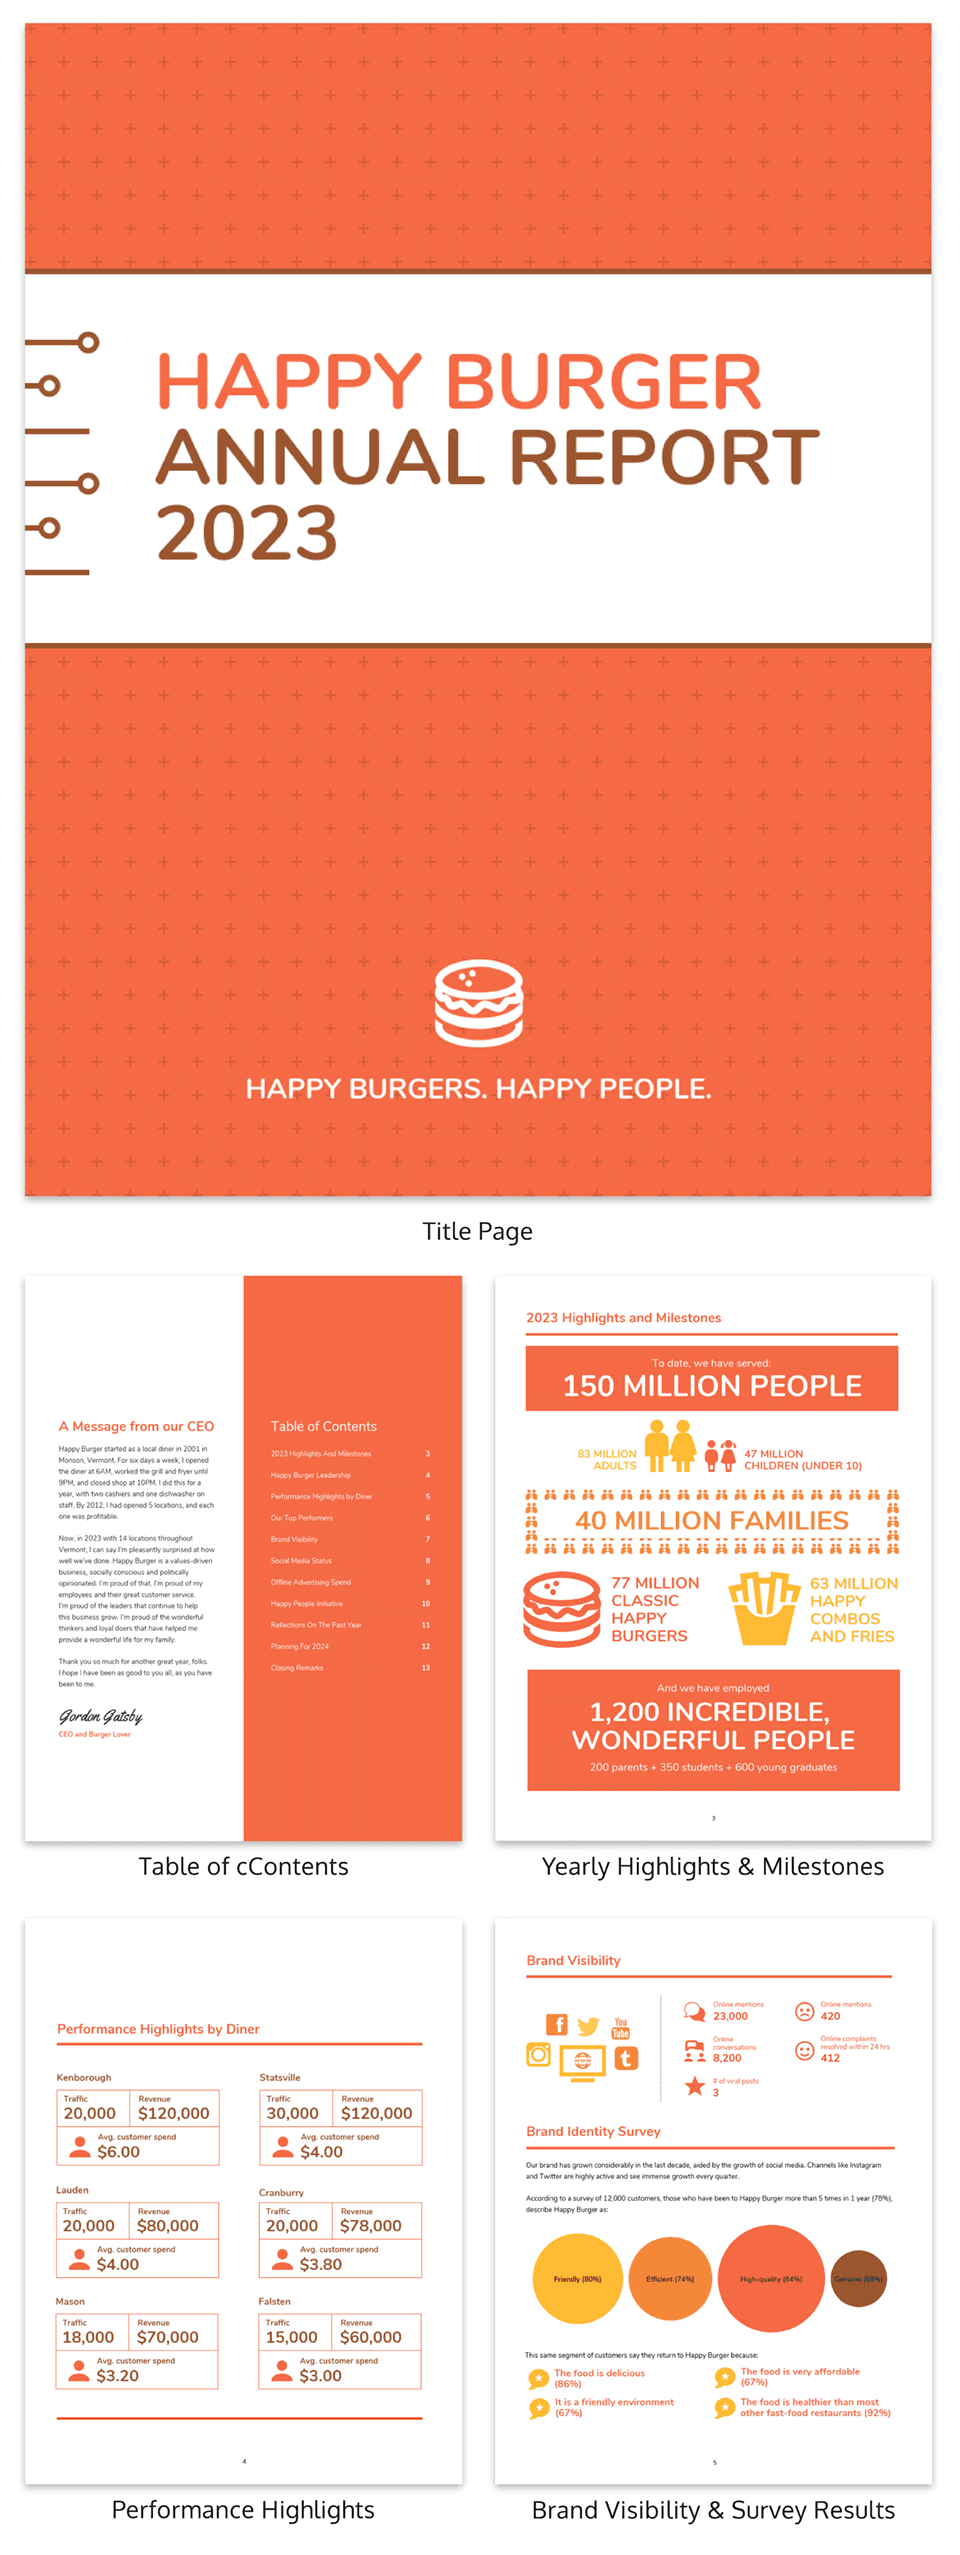 55+ Customizable Annual Report Design Templates, Examples & Tips With Wrap Up Report Template